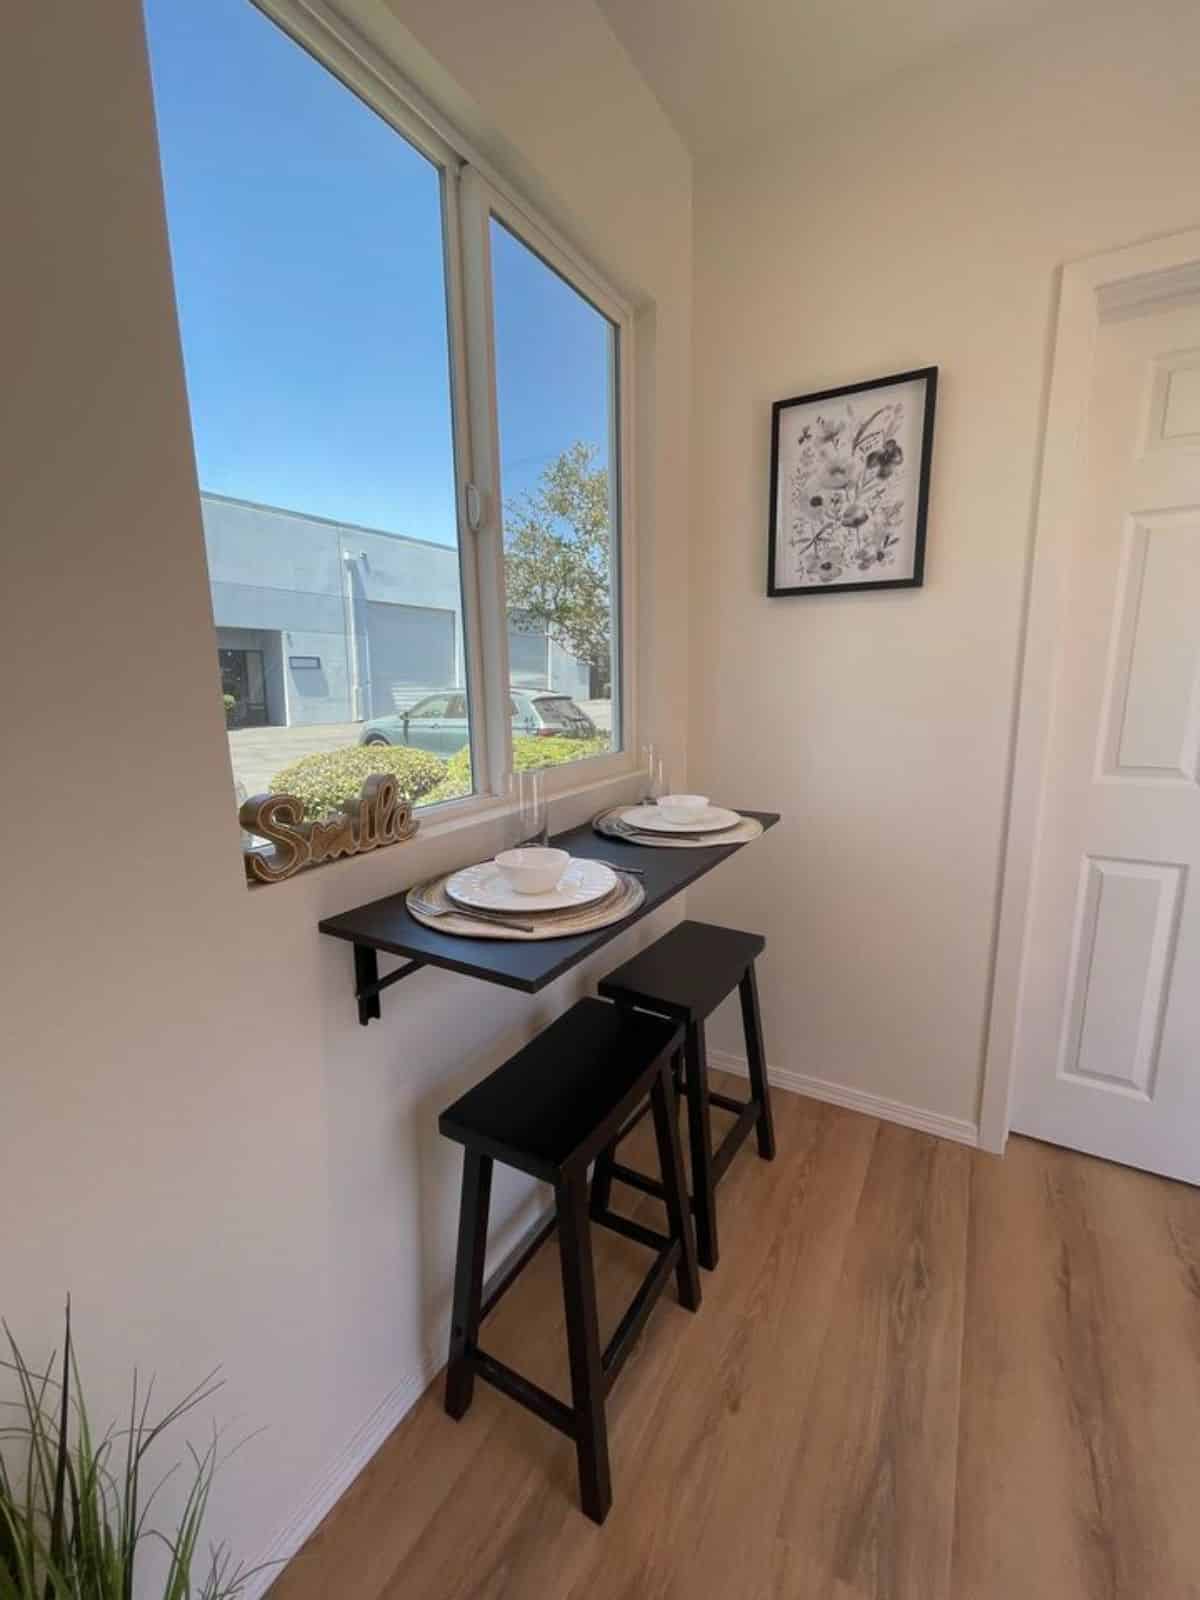 small dining table with 2 stools besides the window